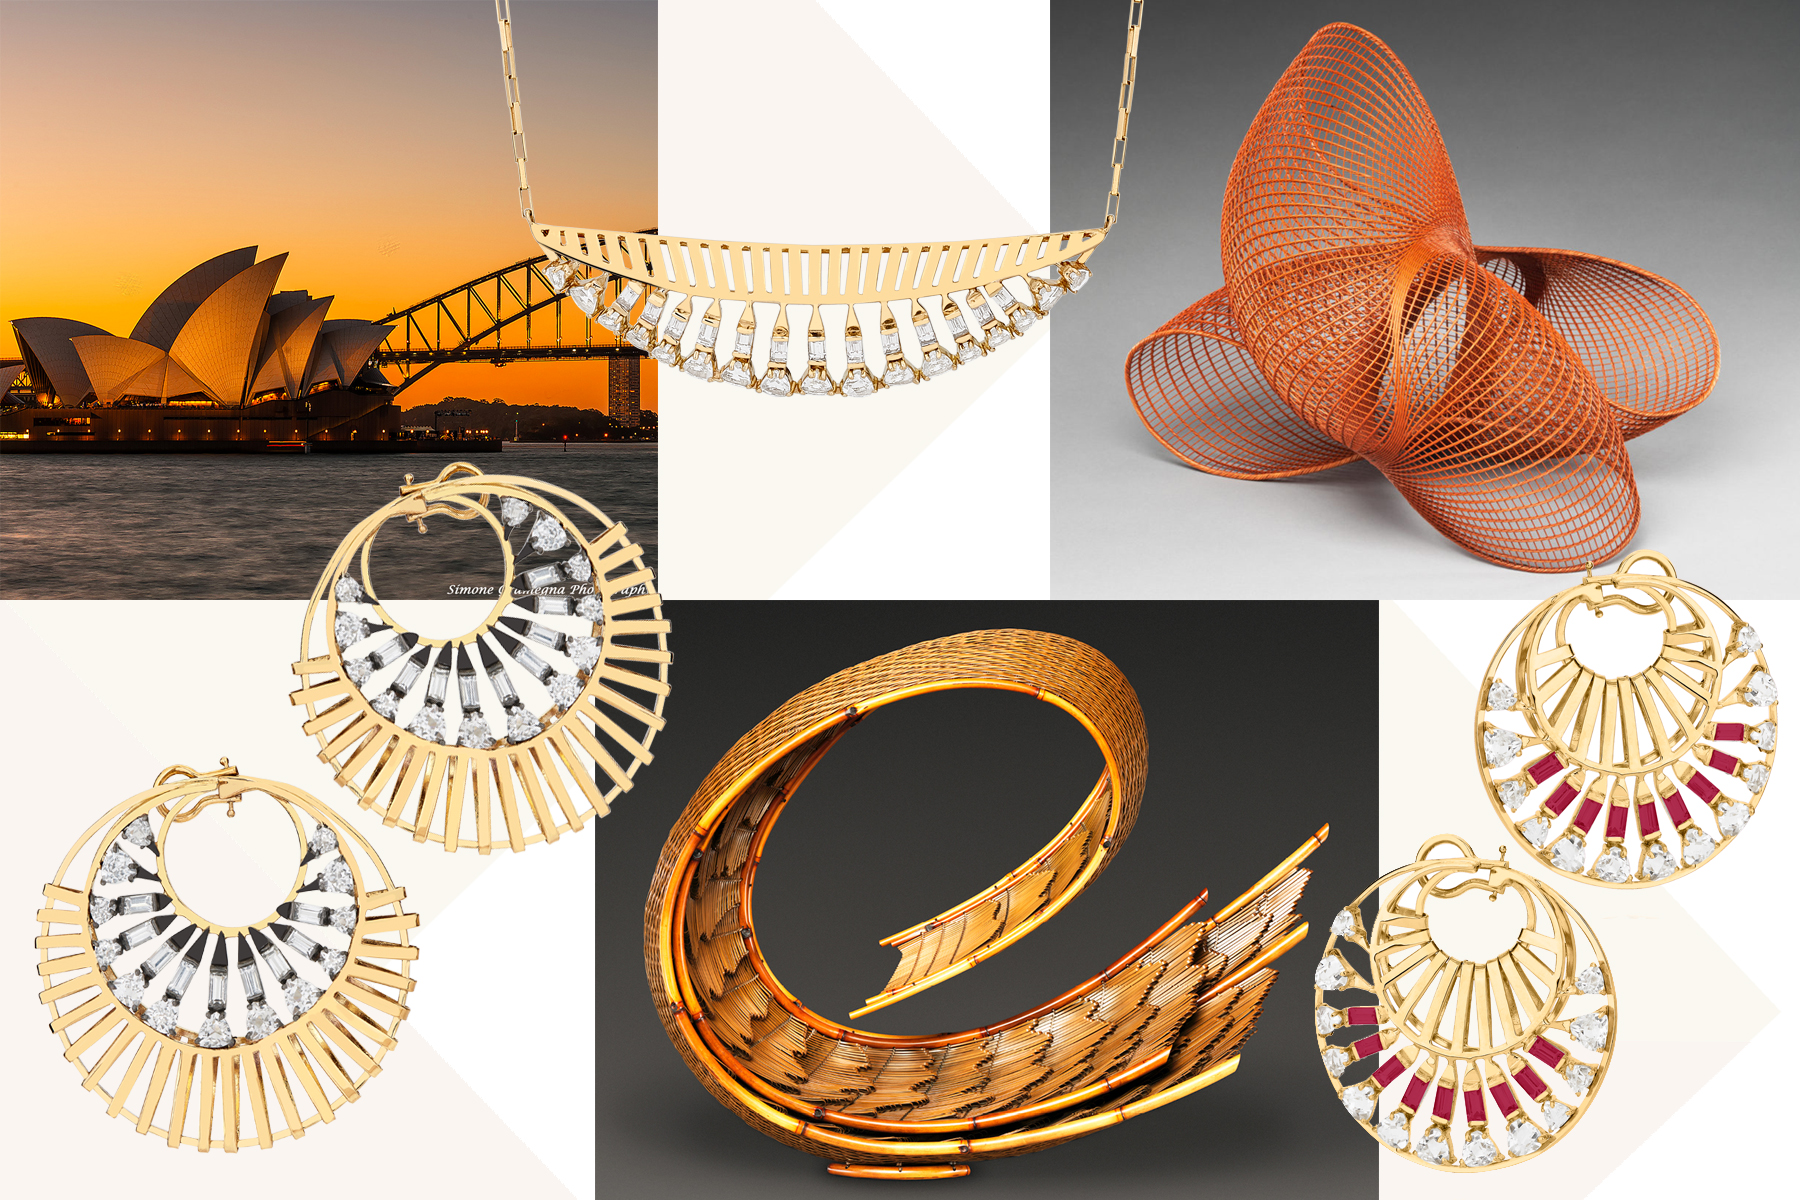 Jewellery from Carol Kauffmann's 'Trapeze' collection, and its inspirations 